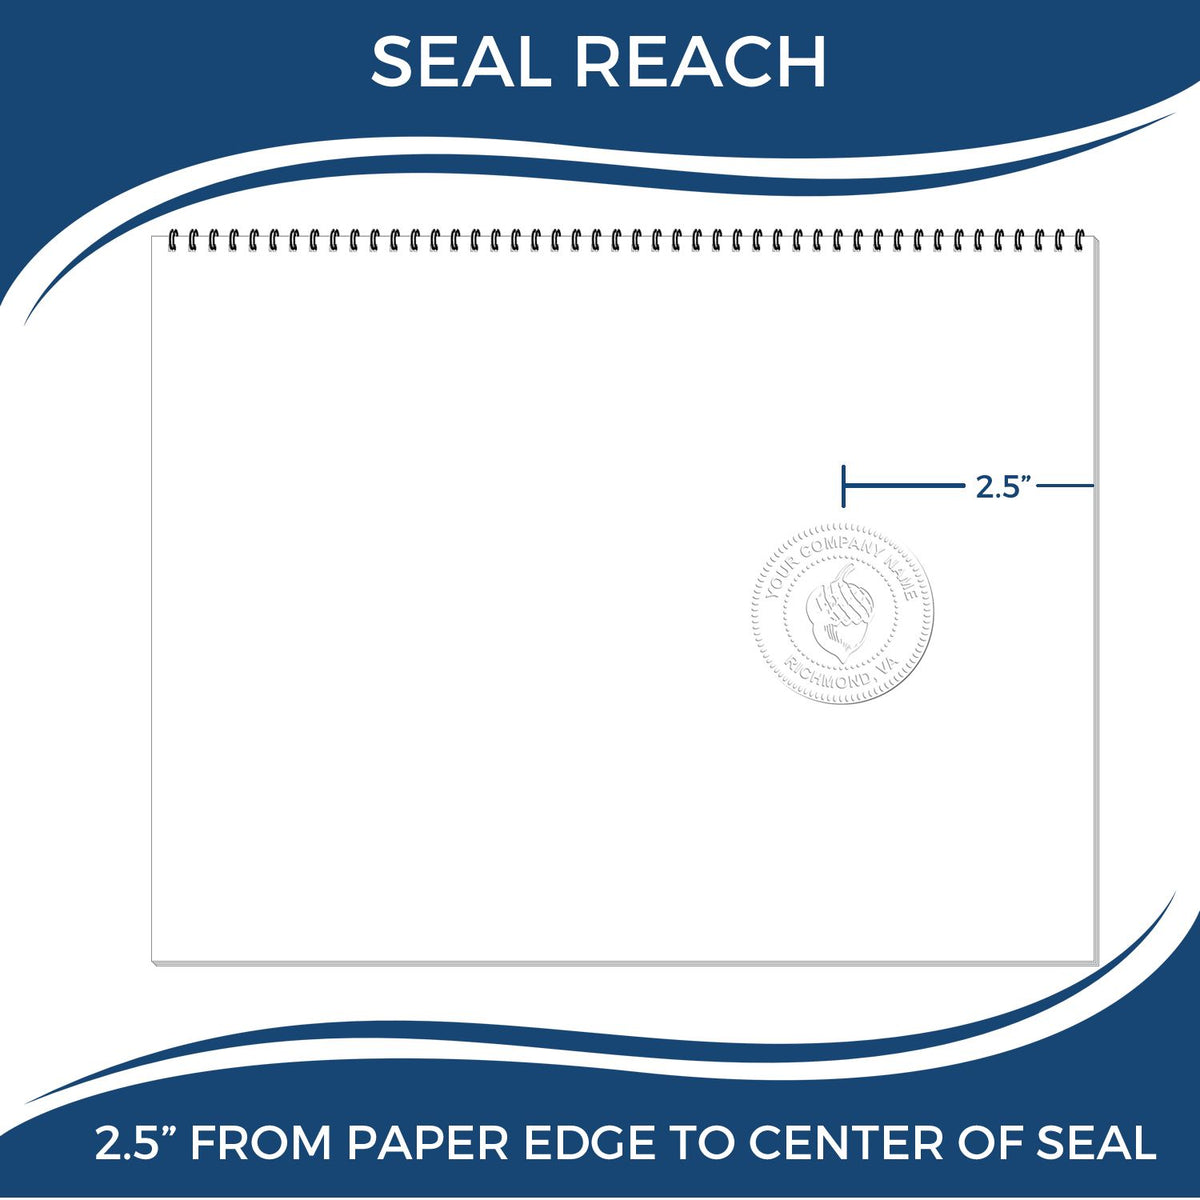 An infographic showing the seal reach which is represented by a ruler and a miniature seal image of the Long Reach Arkansas Geology Seal